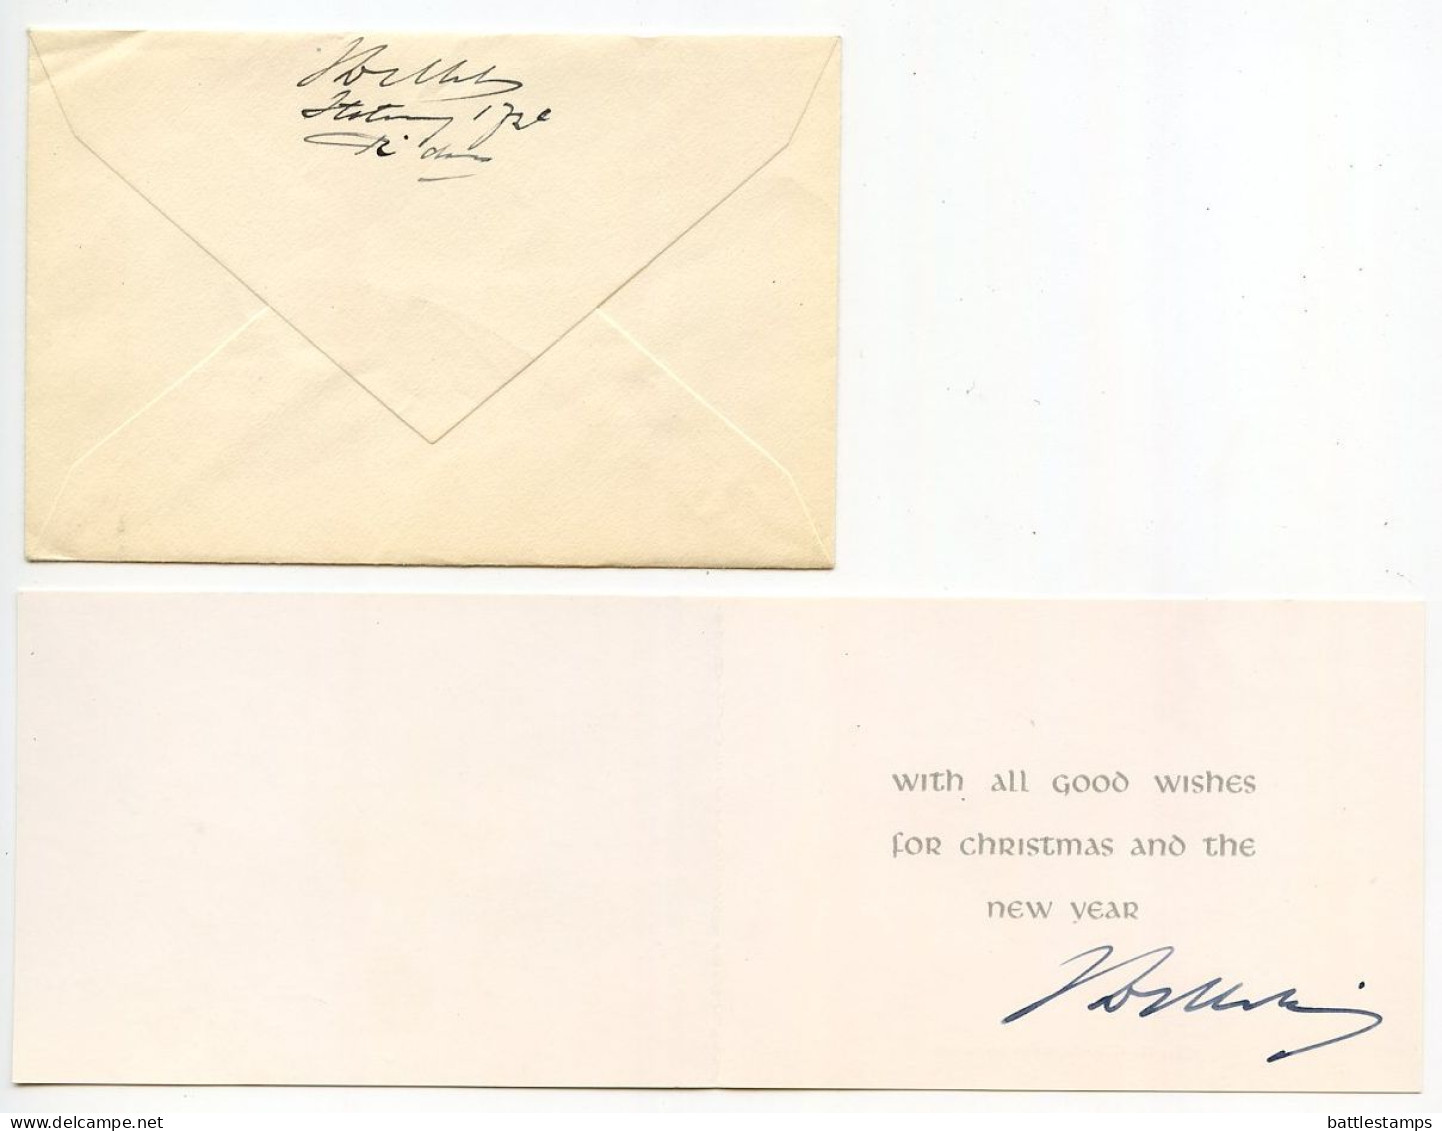 Netherlands 1958 Airmail Cover & Christmas / New Year Card; Rotterdam To Watervliet, New York; Scott B316 & B319 - Lettres & Documents